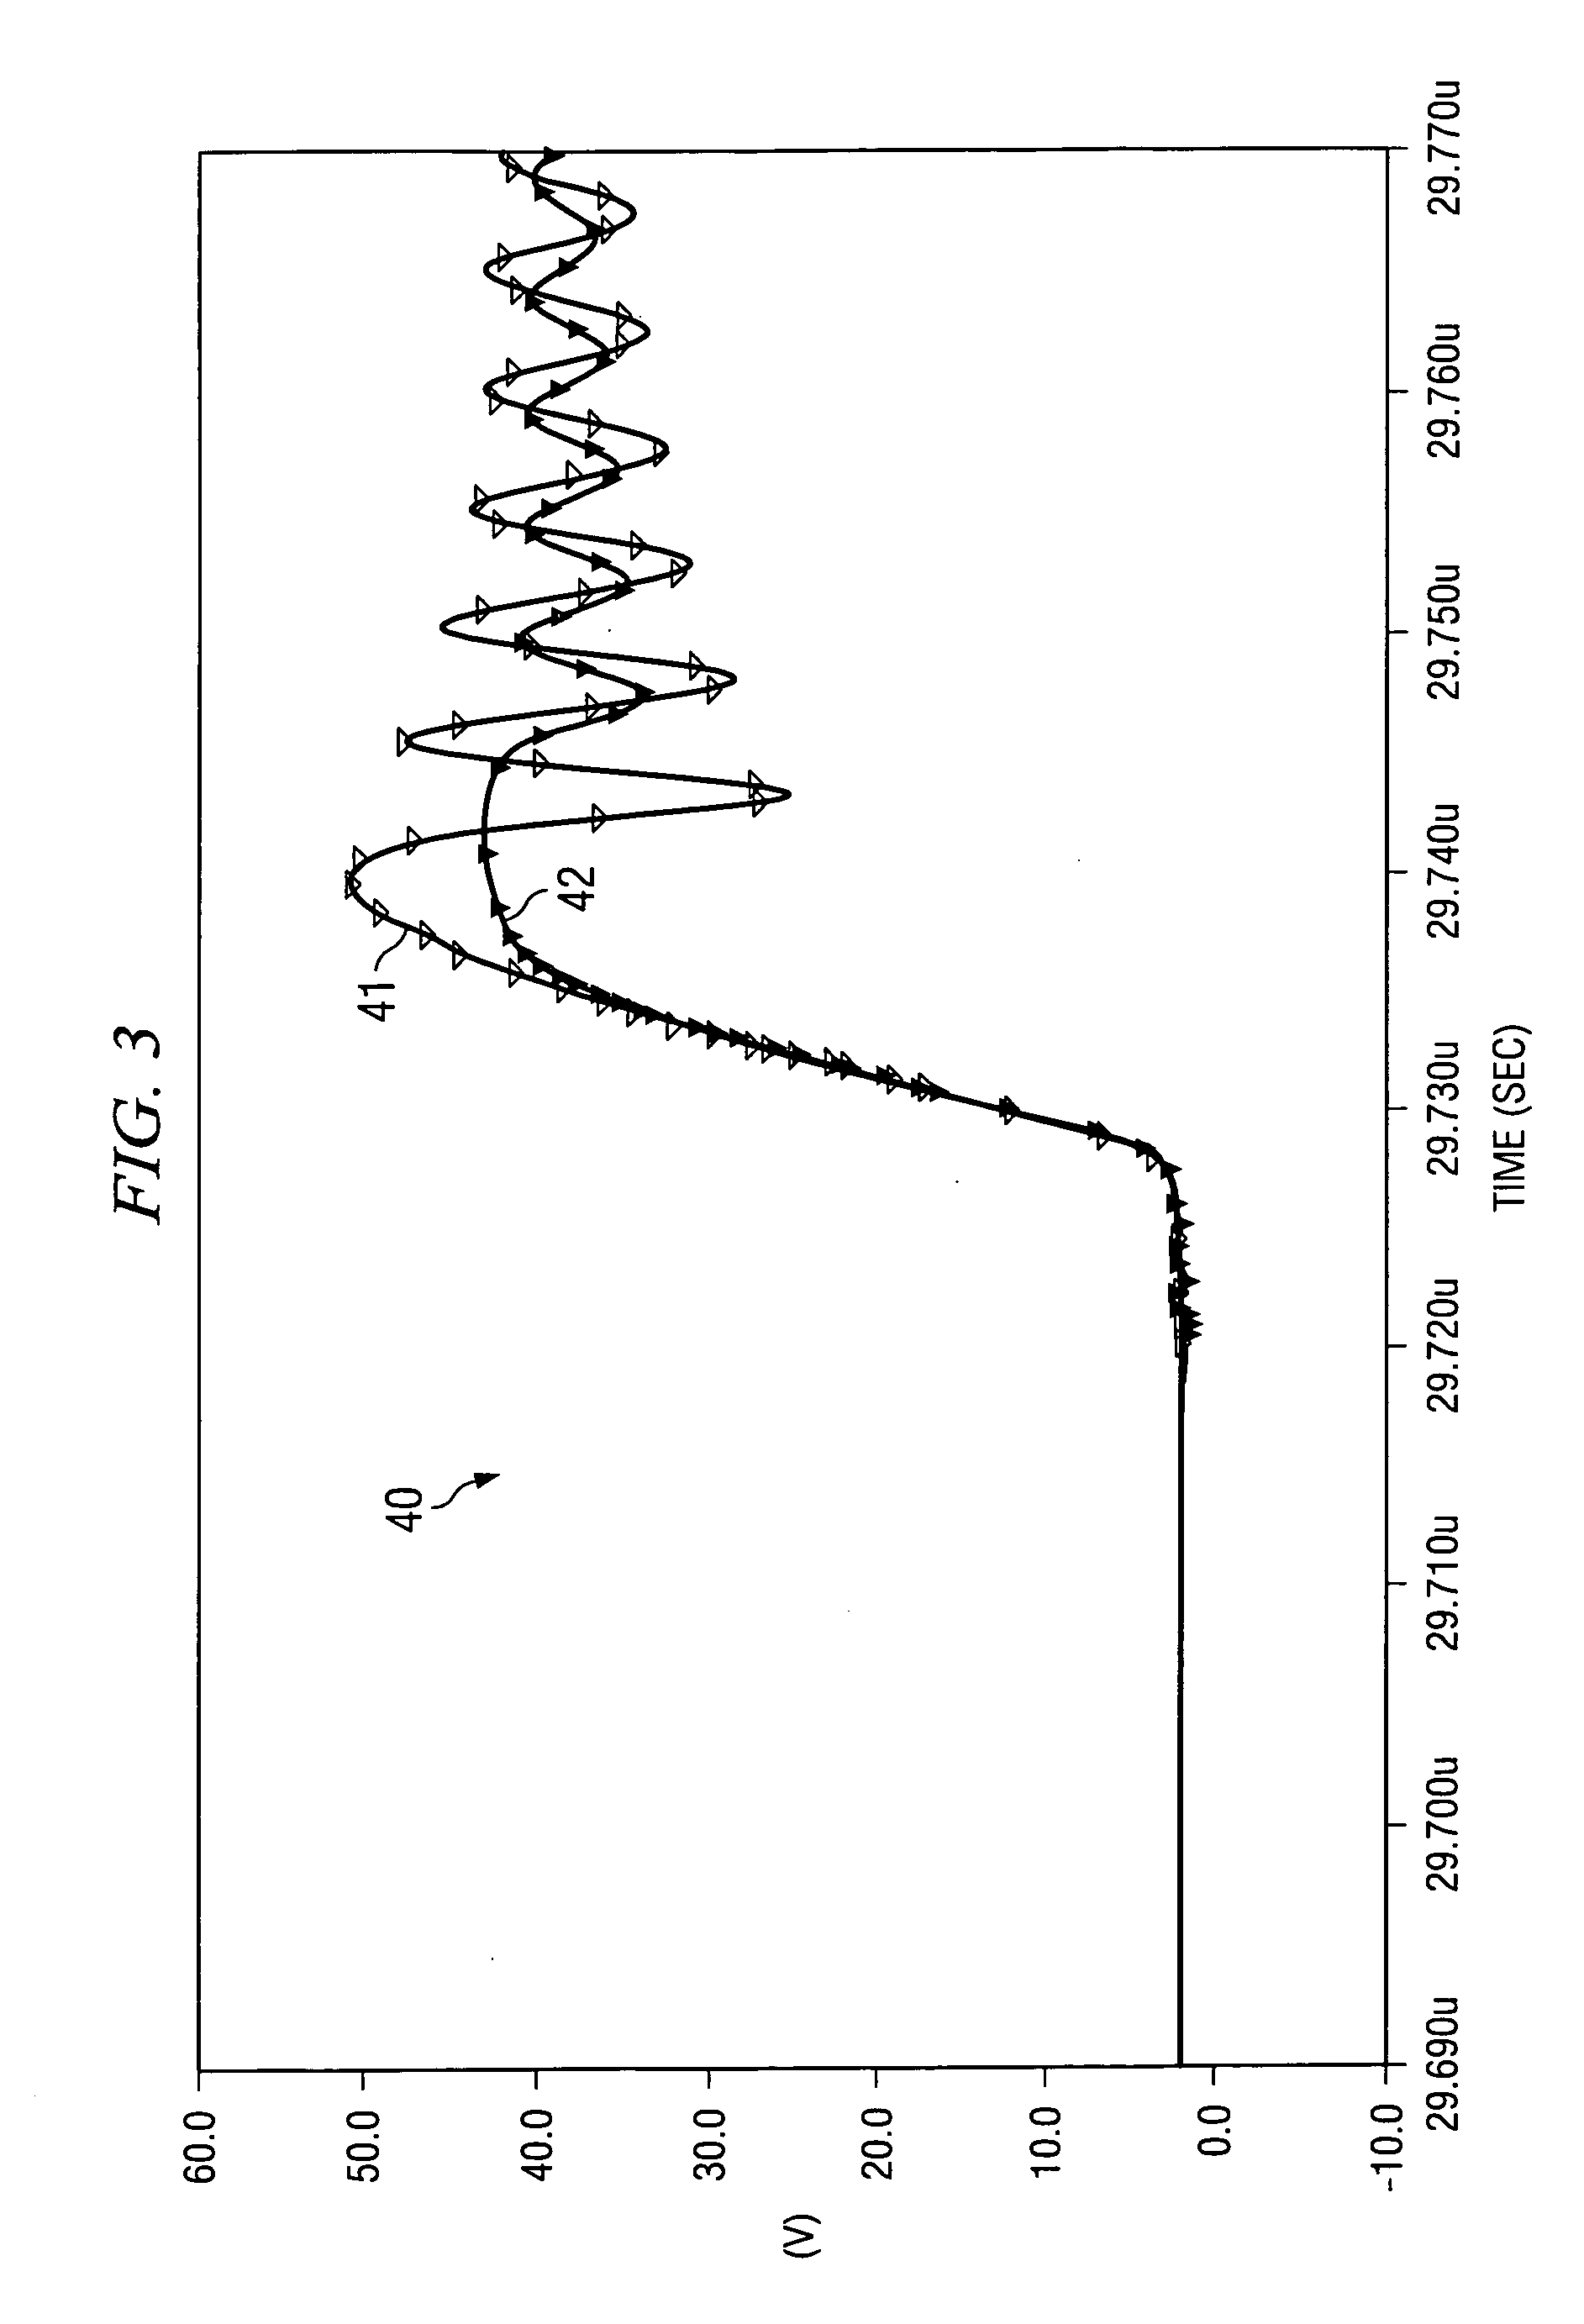 Reduction of voltage spikes in switching half-bridge stages